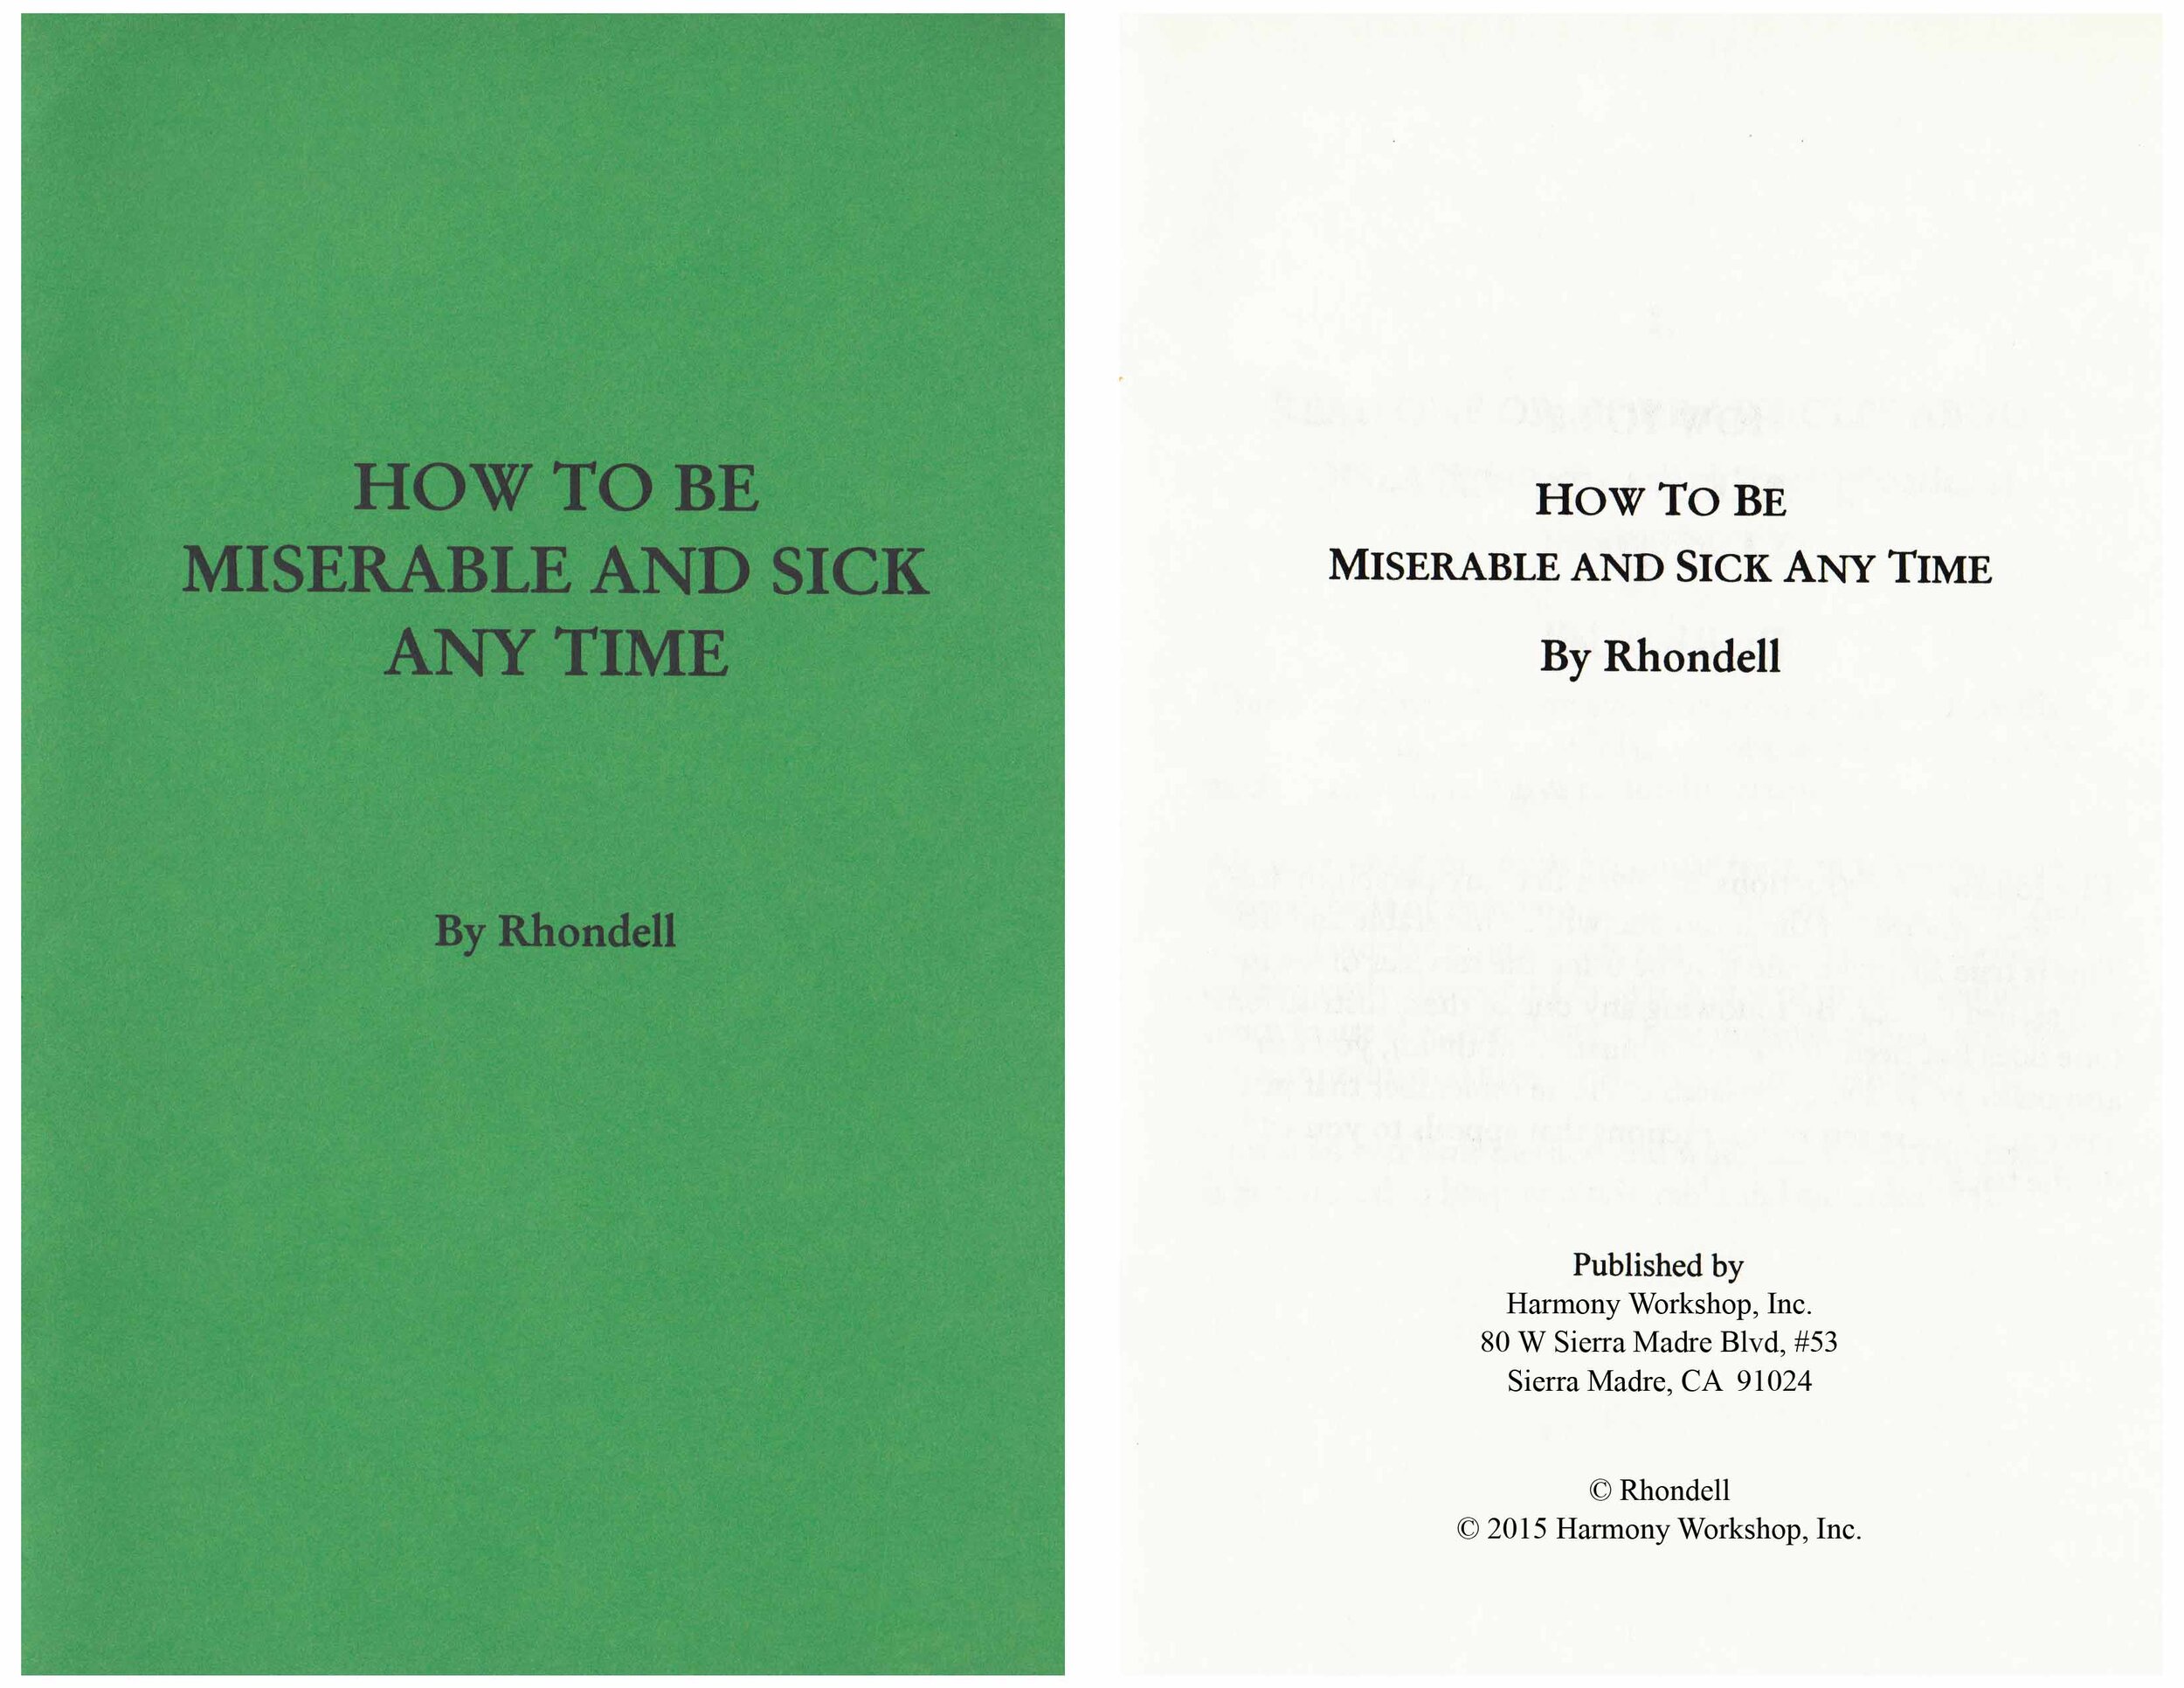 rhondell_how_to_be_miserable_sick_cover.jpg